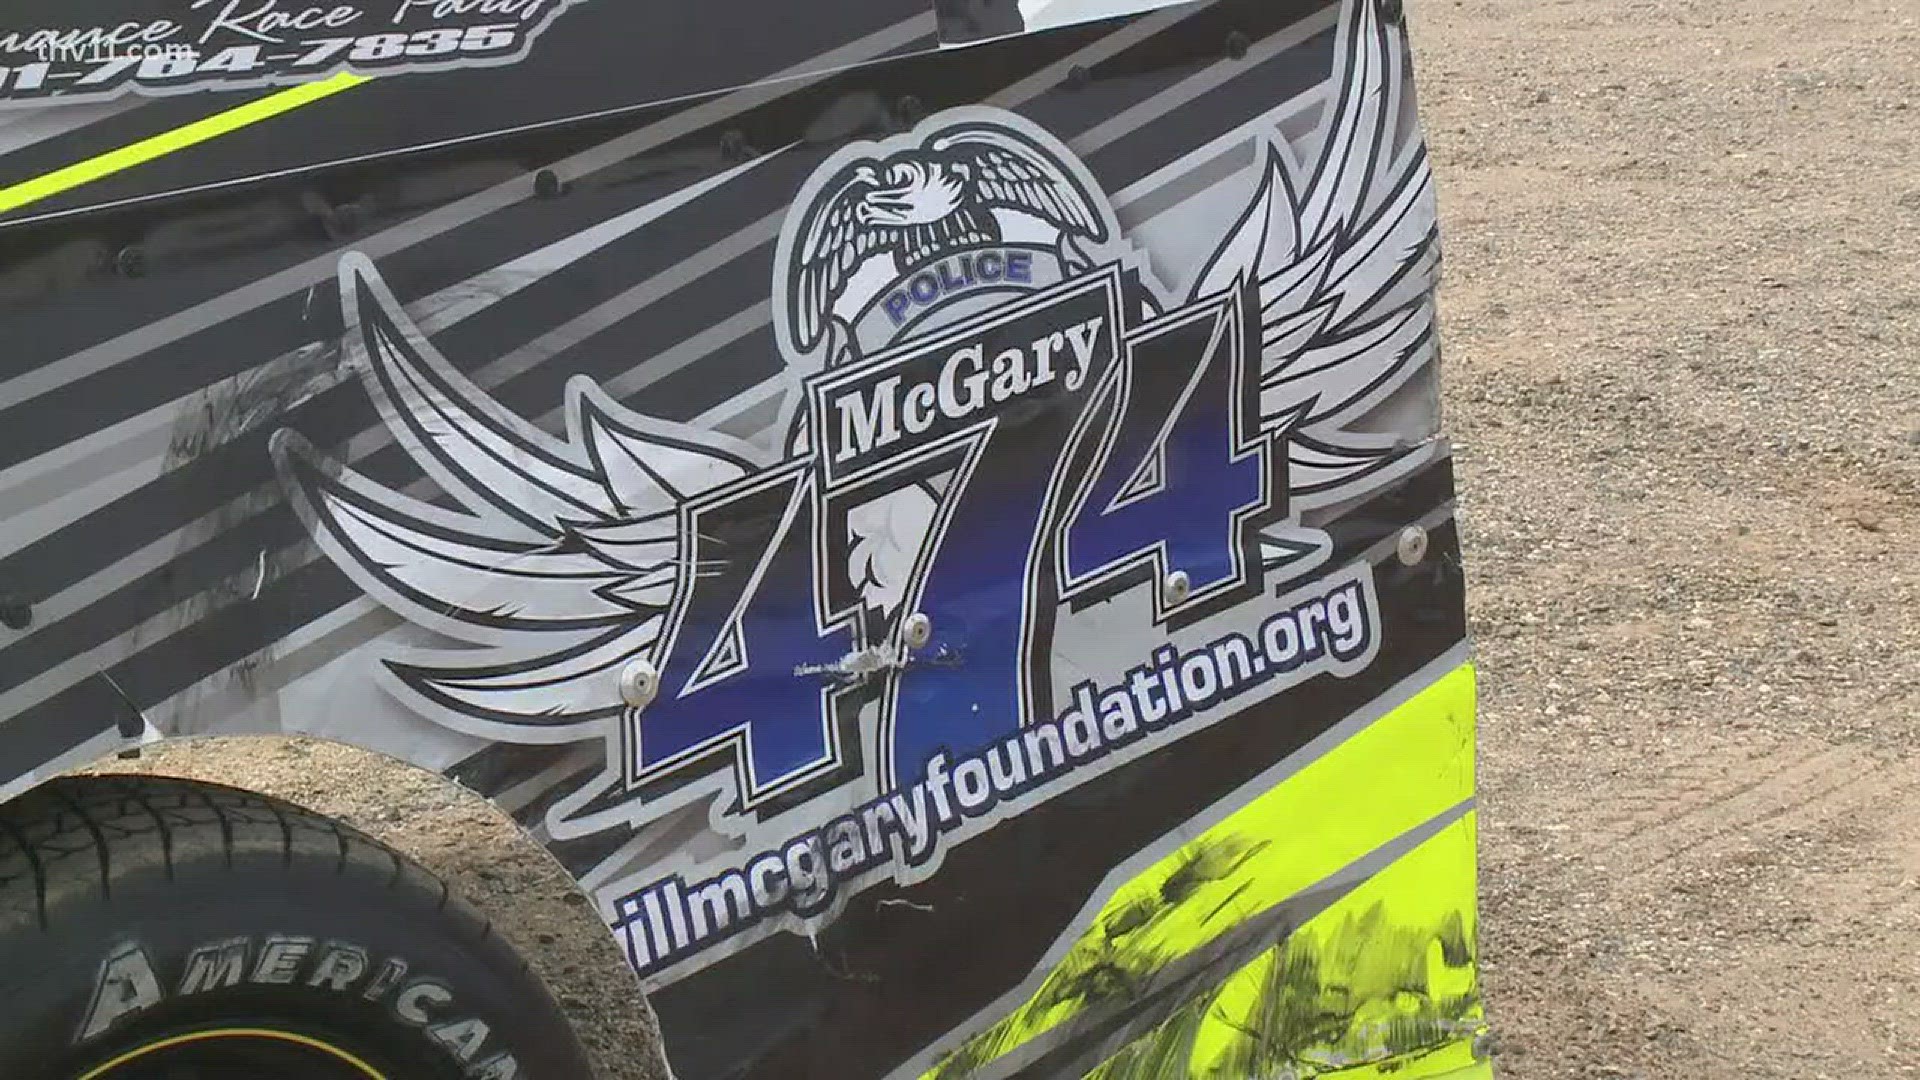 In 2013, Conway Arkansas Will McGary was hit and killed by a driver while on duty. So the Will McGary Foundation honors his memory and helps police officers dealing with trauma.